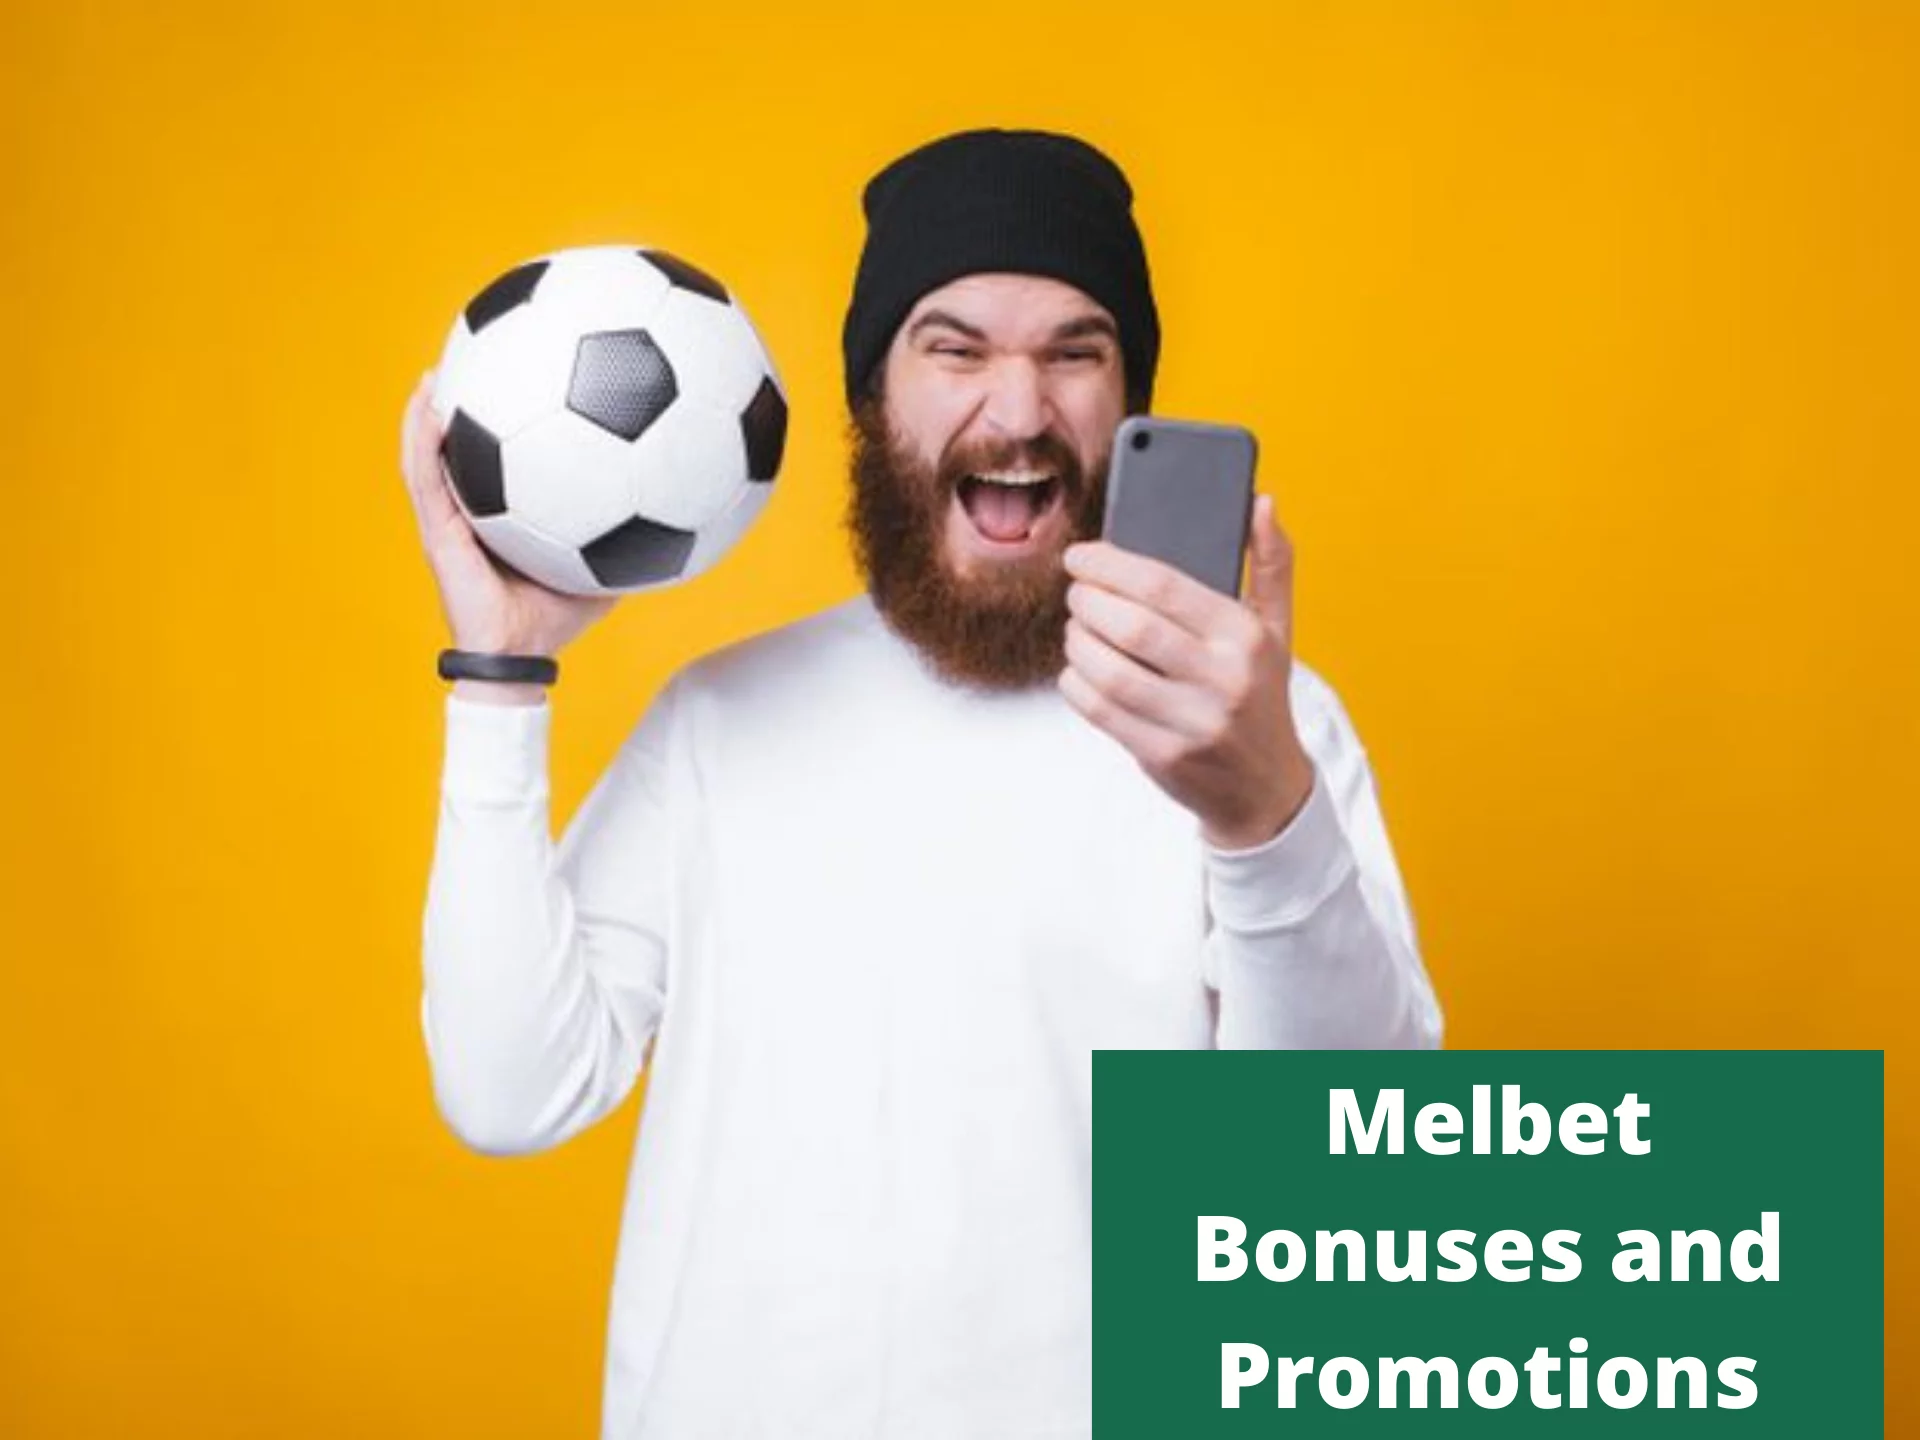 Melbet offers its customers more than 10 types of bonuses.